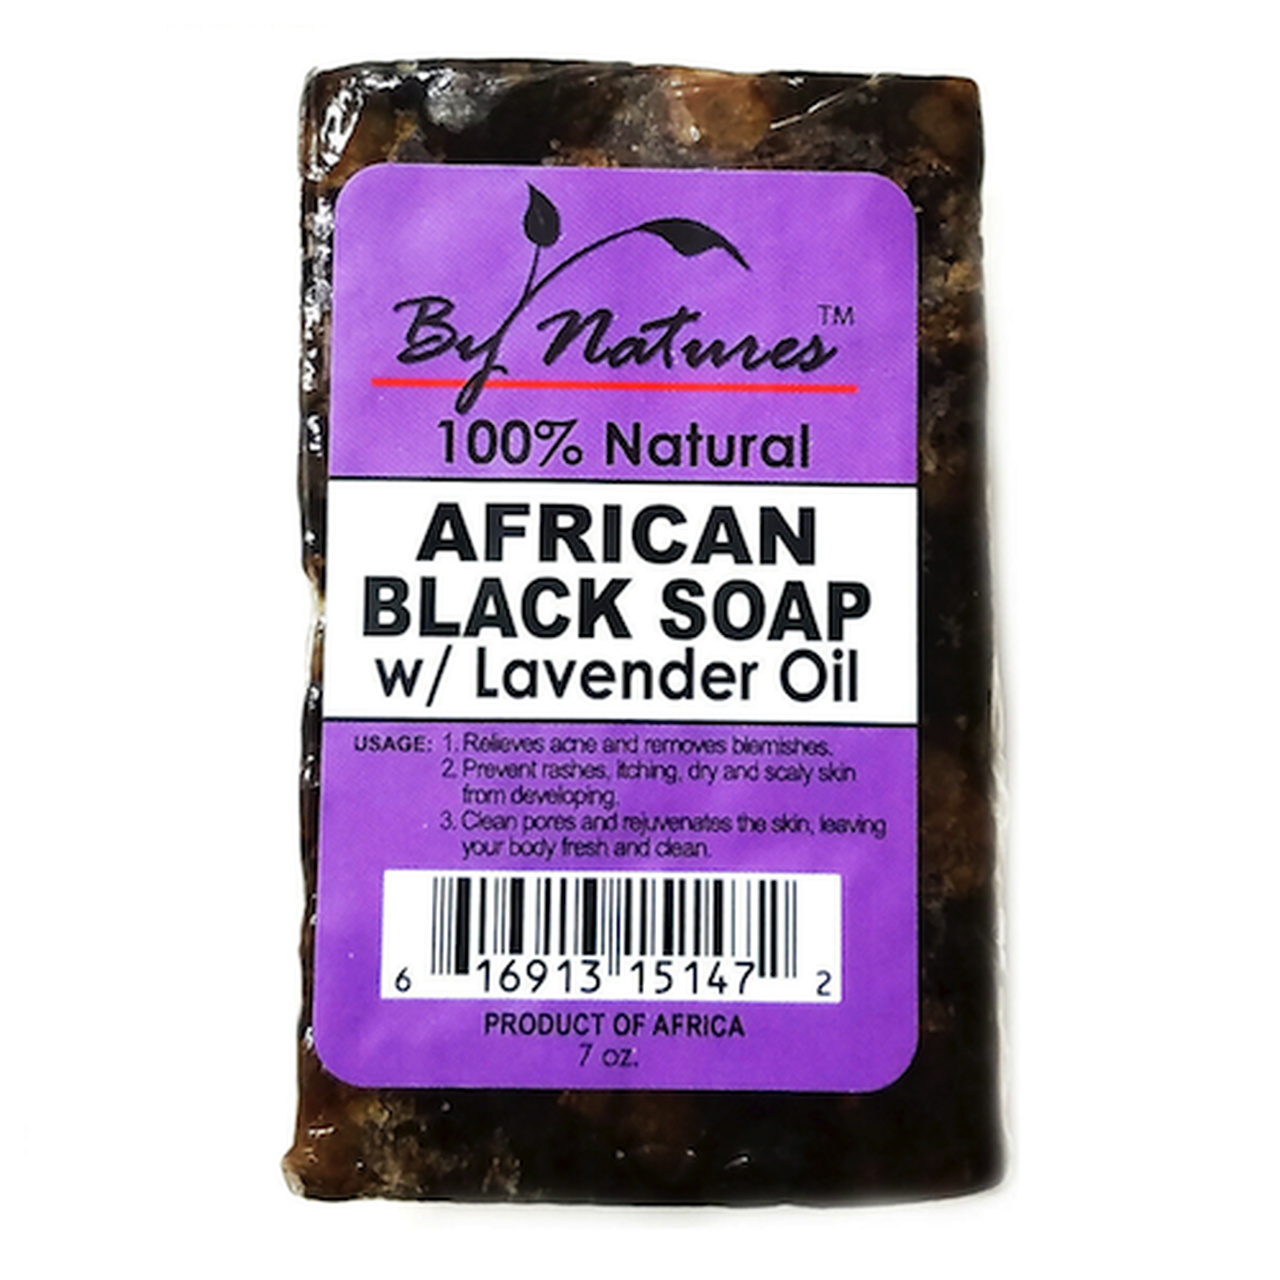 BY NATURE 100% NATURAL AFRICAN BLACK SOAP LAVENDER OIL